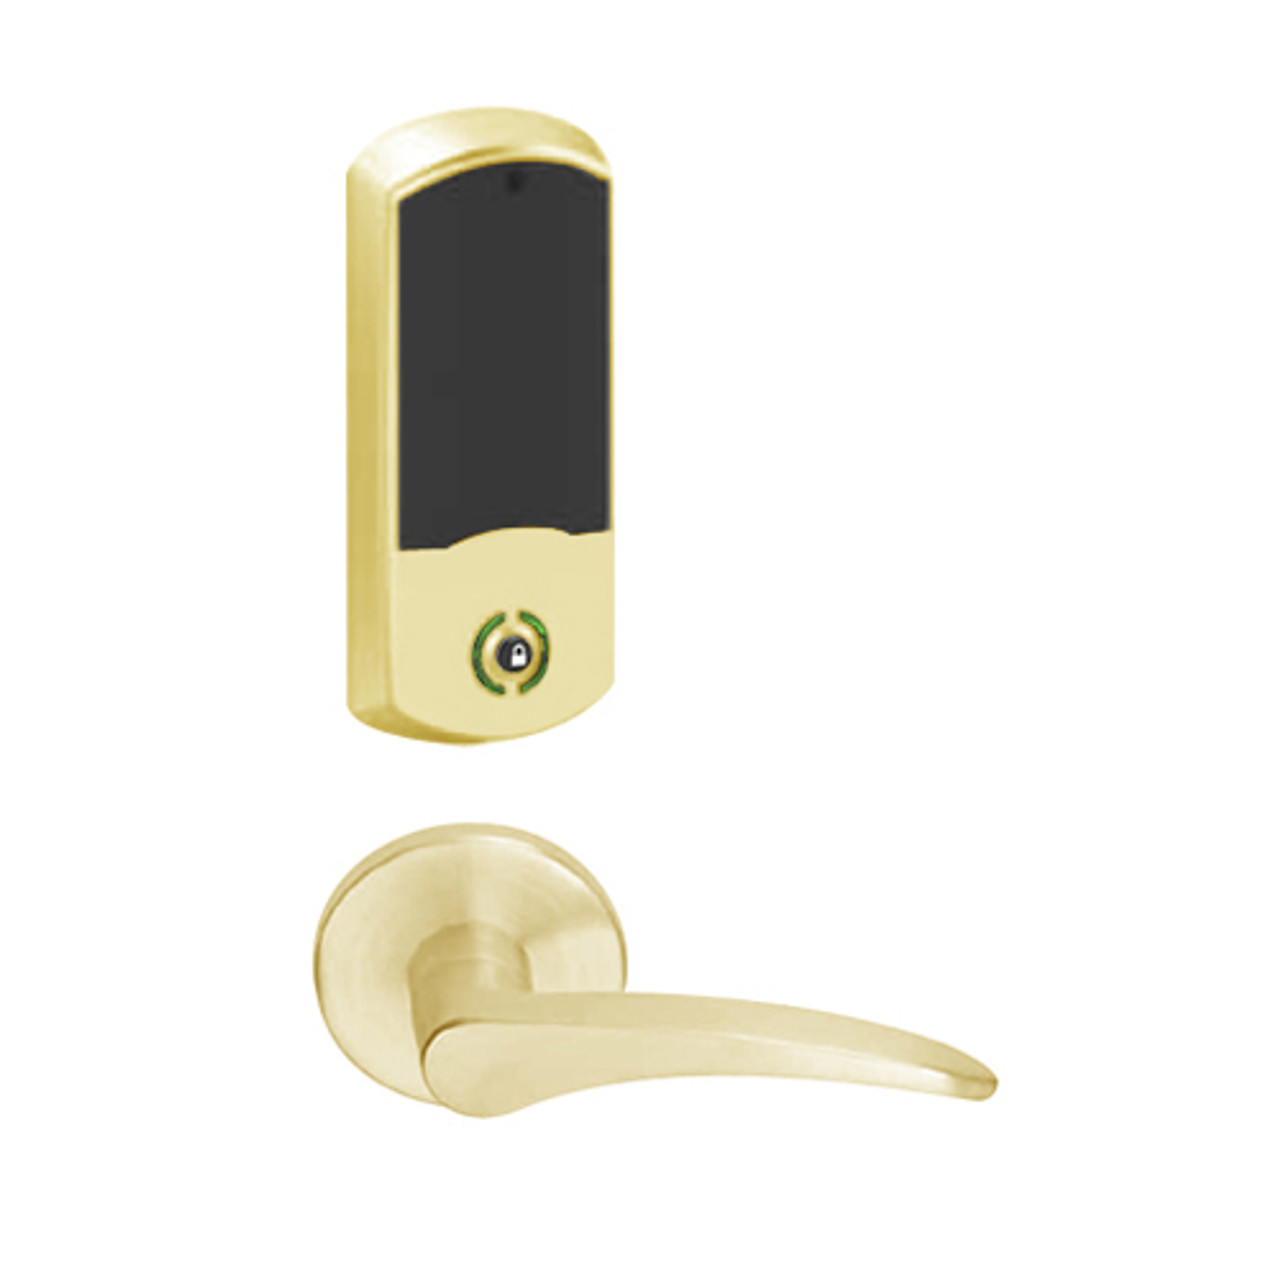 LEMB-GRW-P-12-605-00C-LH Schlage Privacy/Office Wireless Greenwich Mortise Lock with Push Button & LED Indicator and 12 Lever in Bright Brass